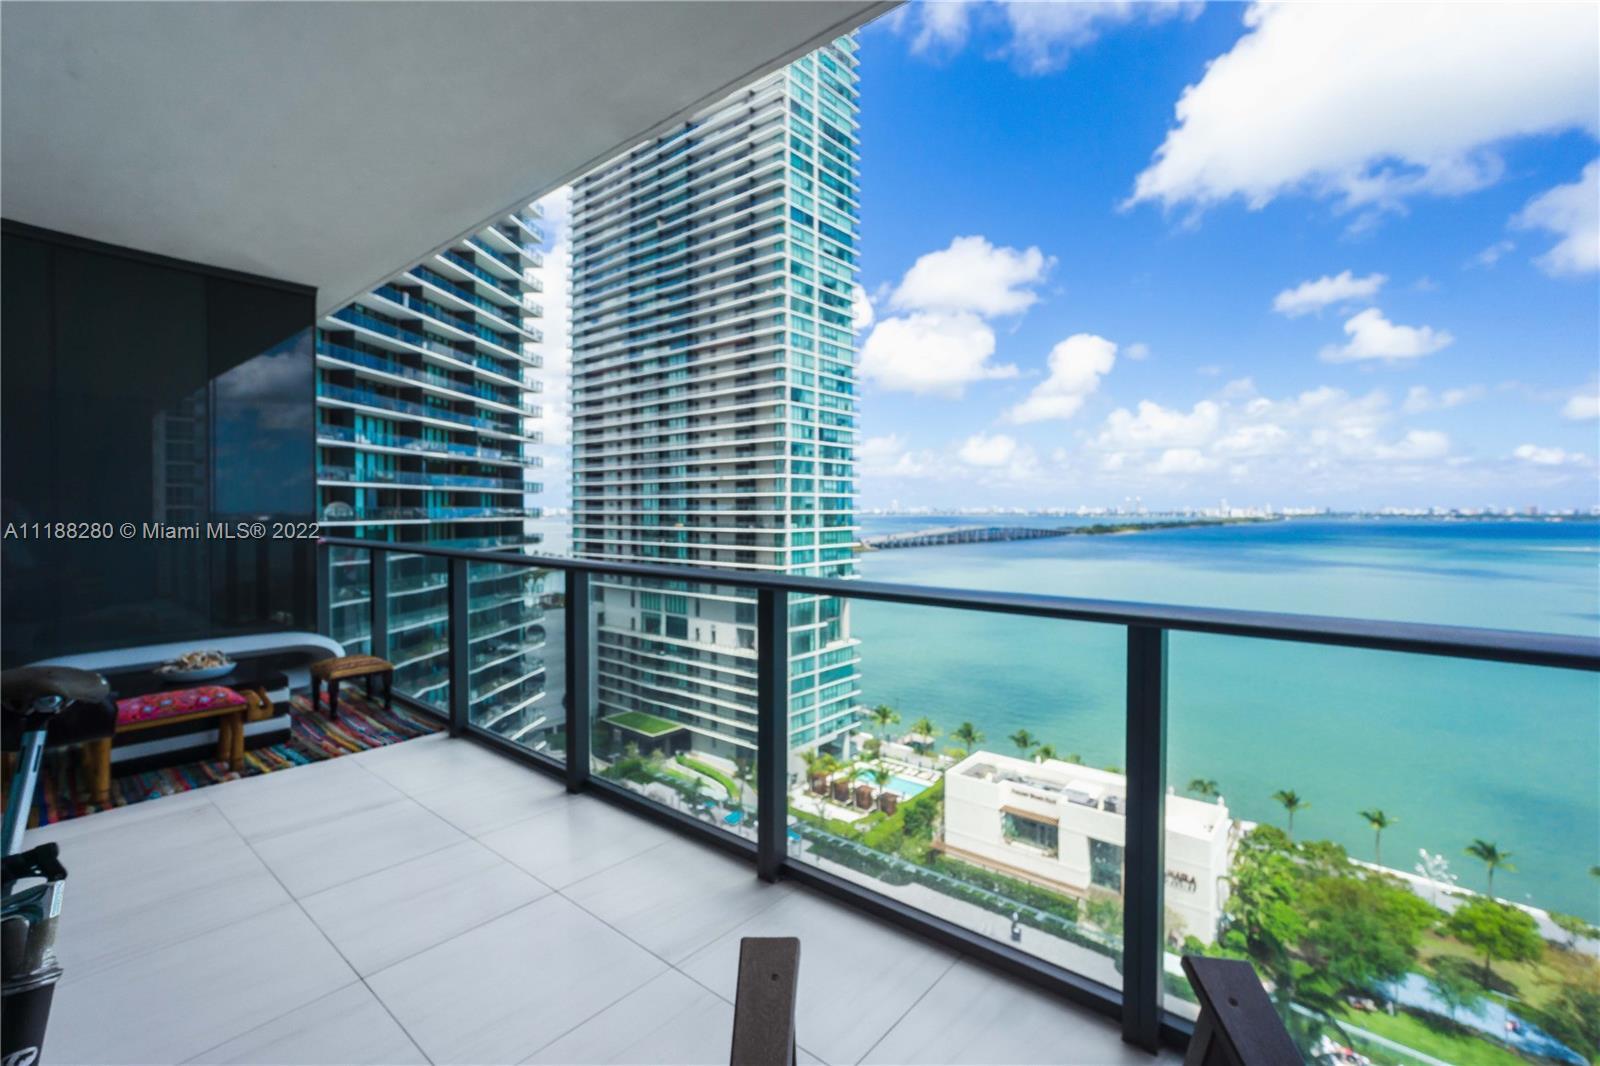 Waterfront GranParaiso located in Edgewater, Beautiful 2 bed/3 bath + DEN (converted to a third bedr